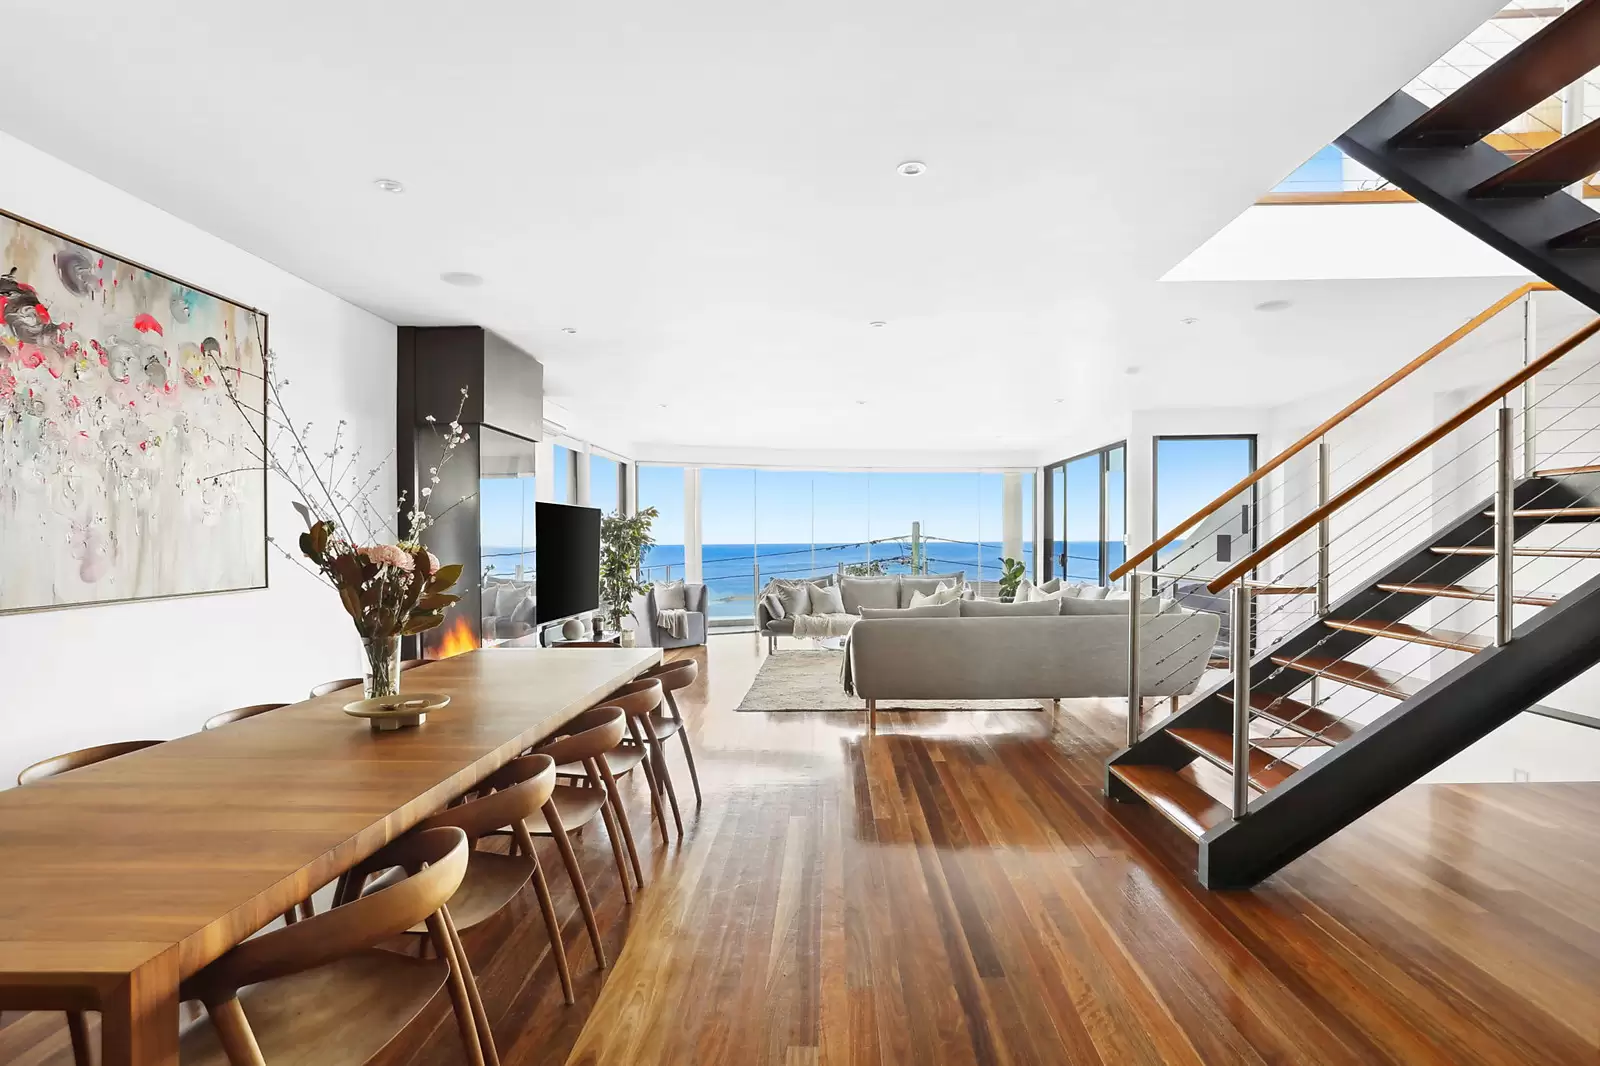 Photo #9: 68 Denning Street, South Coogee - Auction by Sydney Sotheby's International Realty